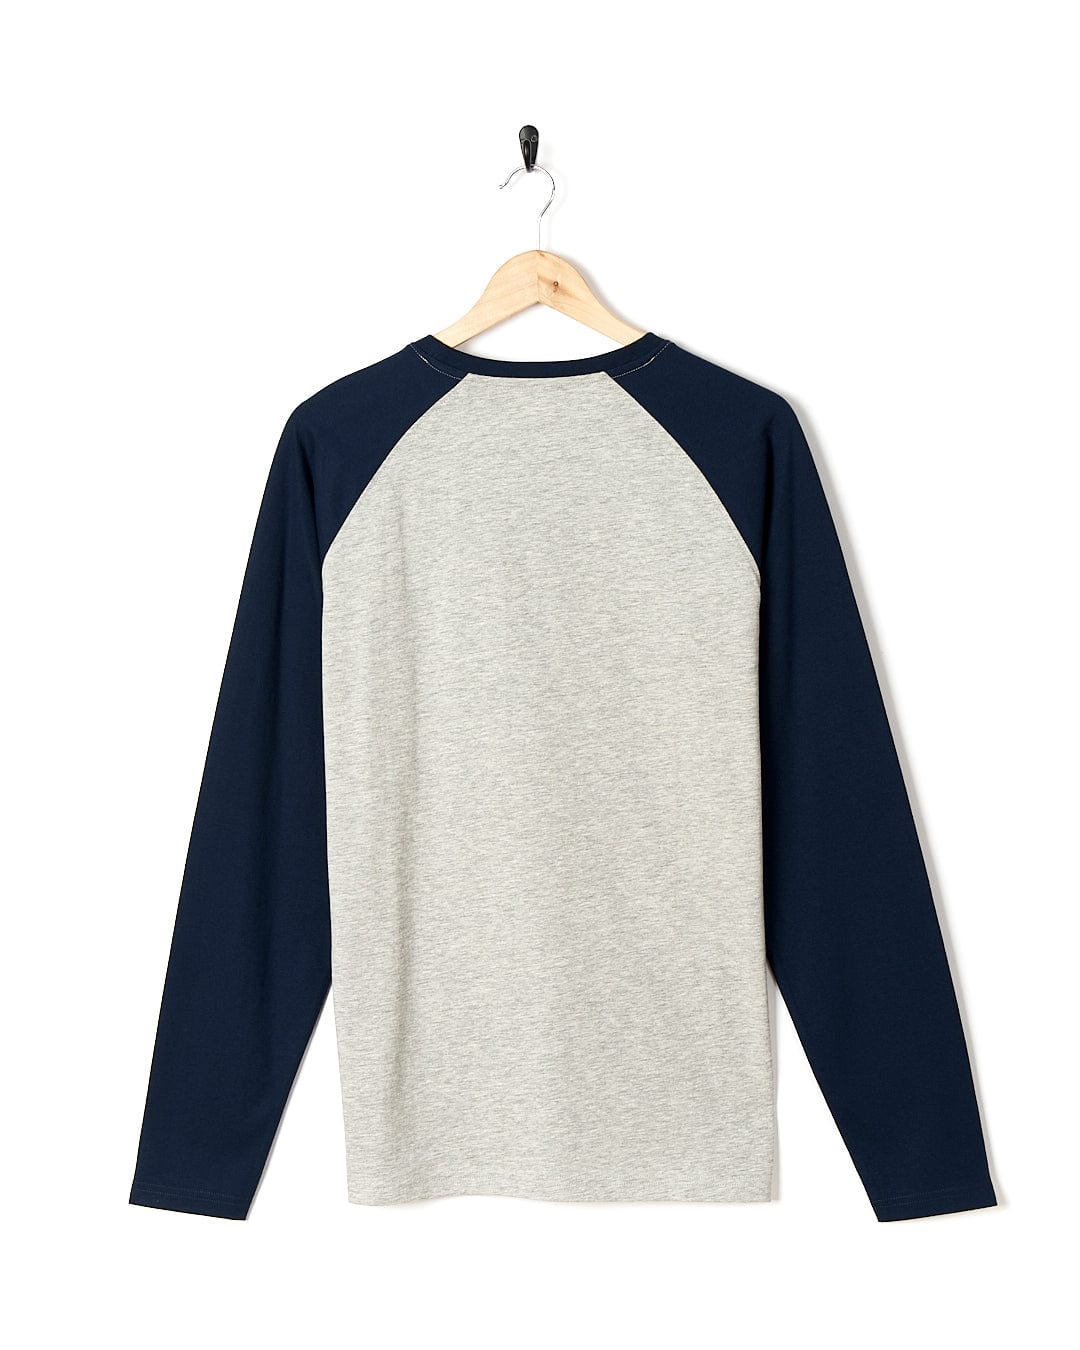 A Speed - Mens Long Sleeve Raglan T-Shirt in blue and navy by Saltrock.